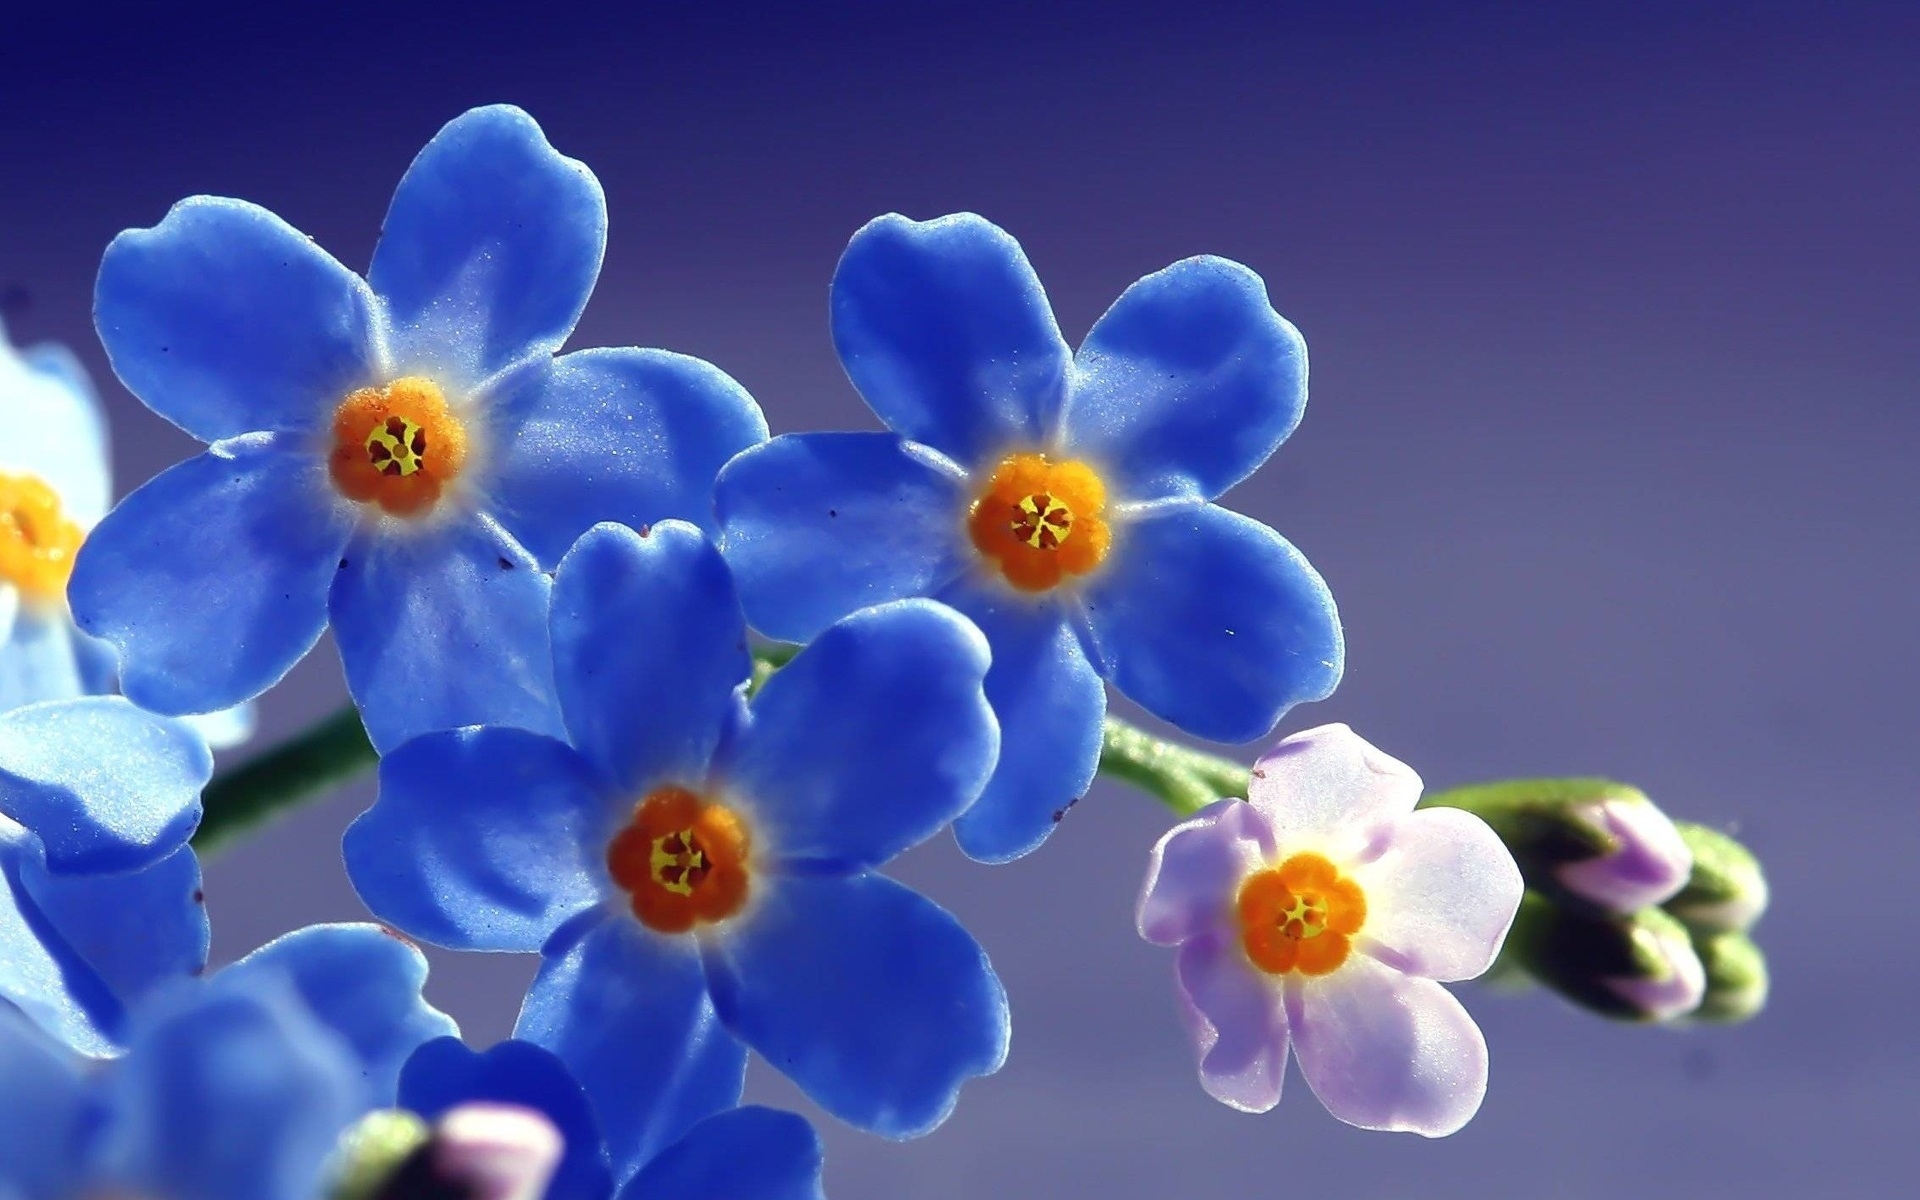 High Resolution Flower Images Free Download - 1920x1200 Wallpaper